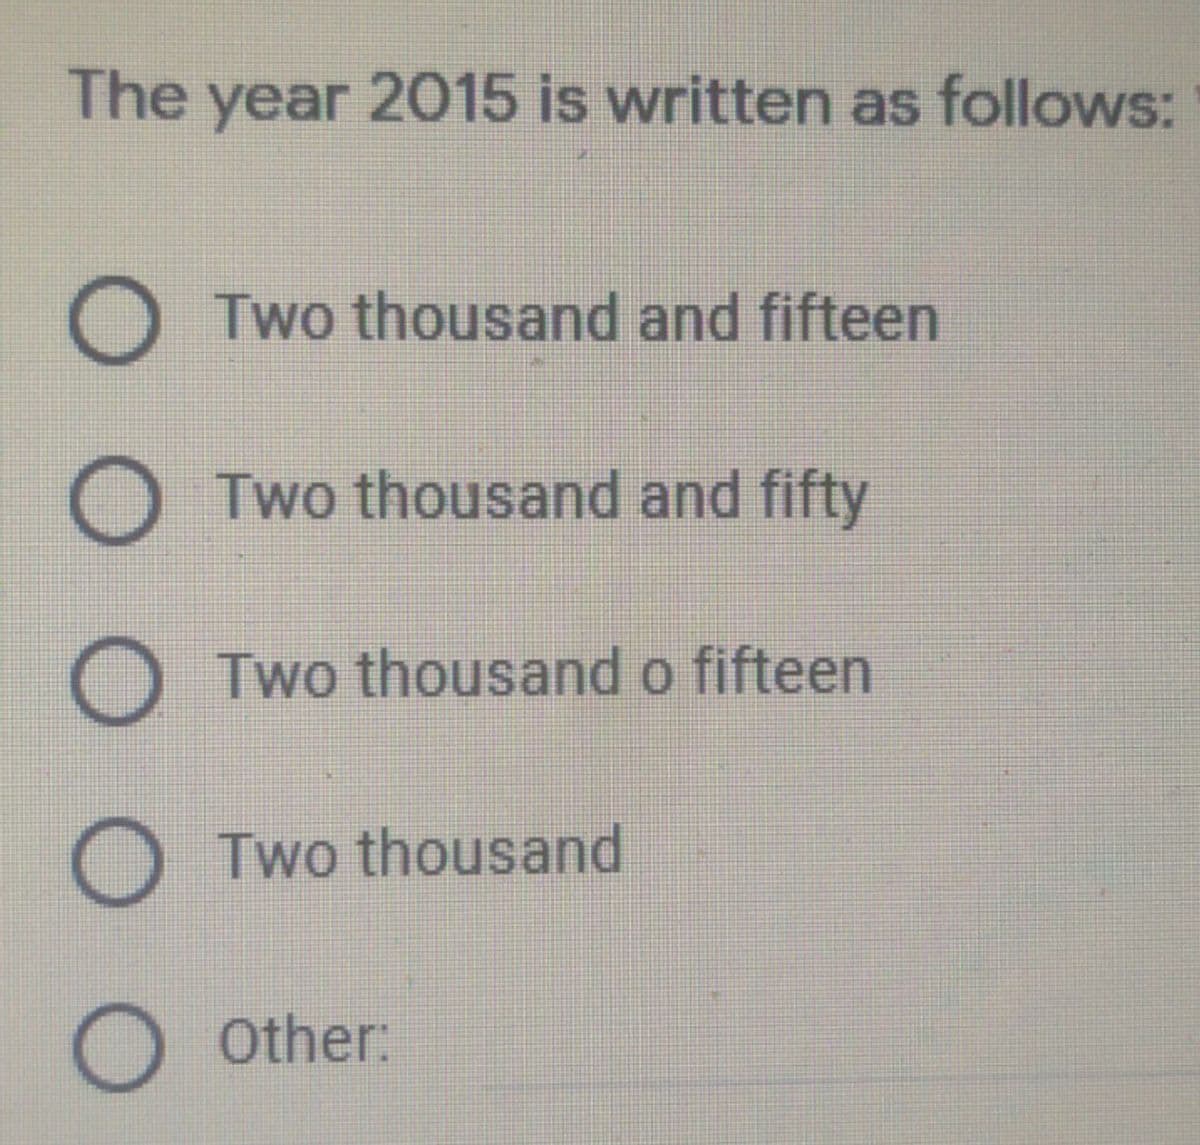 The year 2015 is written as follows:
Two thousand and fifteen
Two thousand and fifty
Two thousand o fifteen
O Two thousand
OOther:
